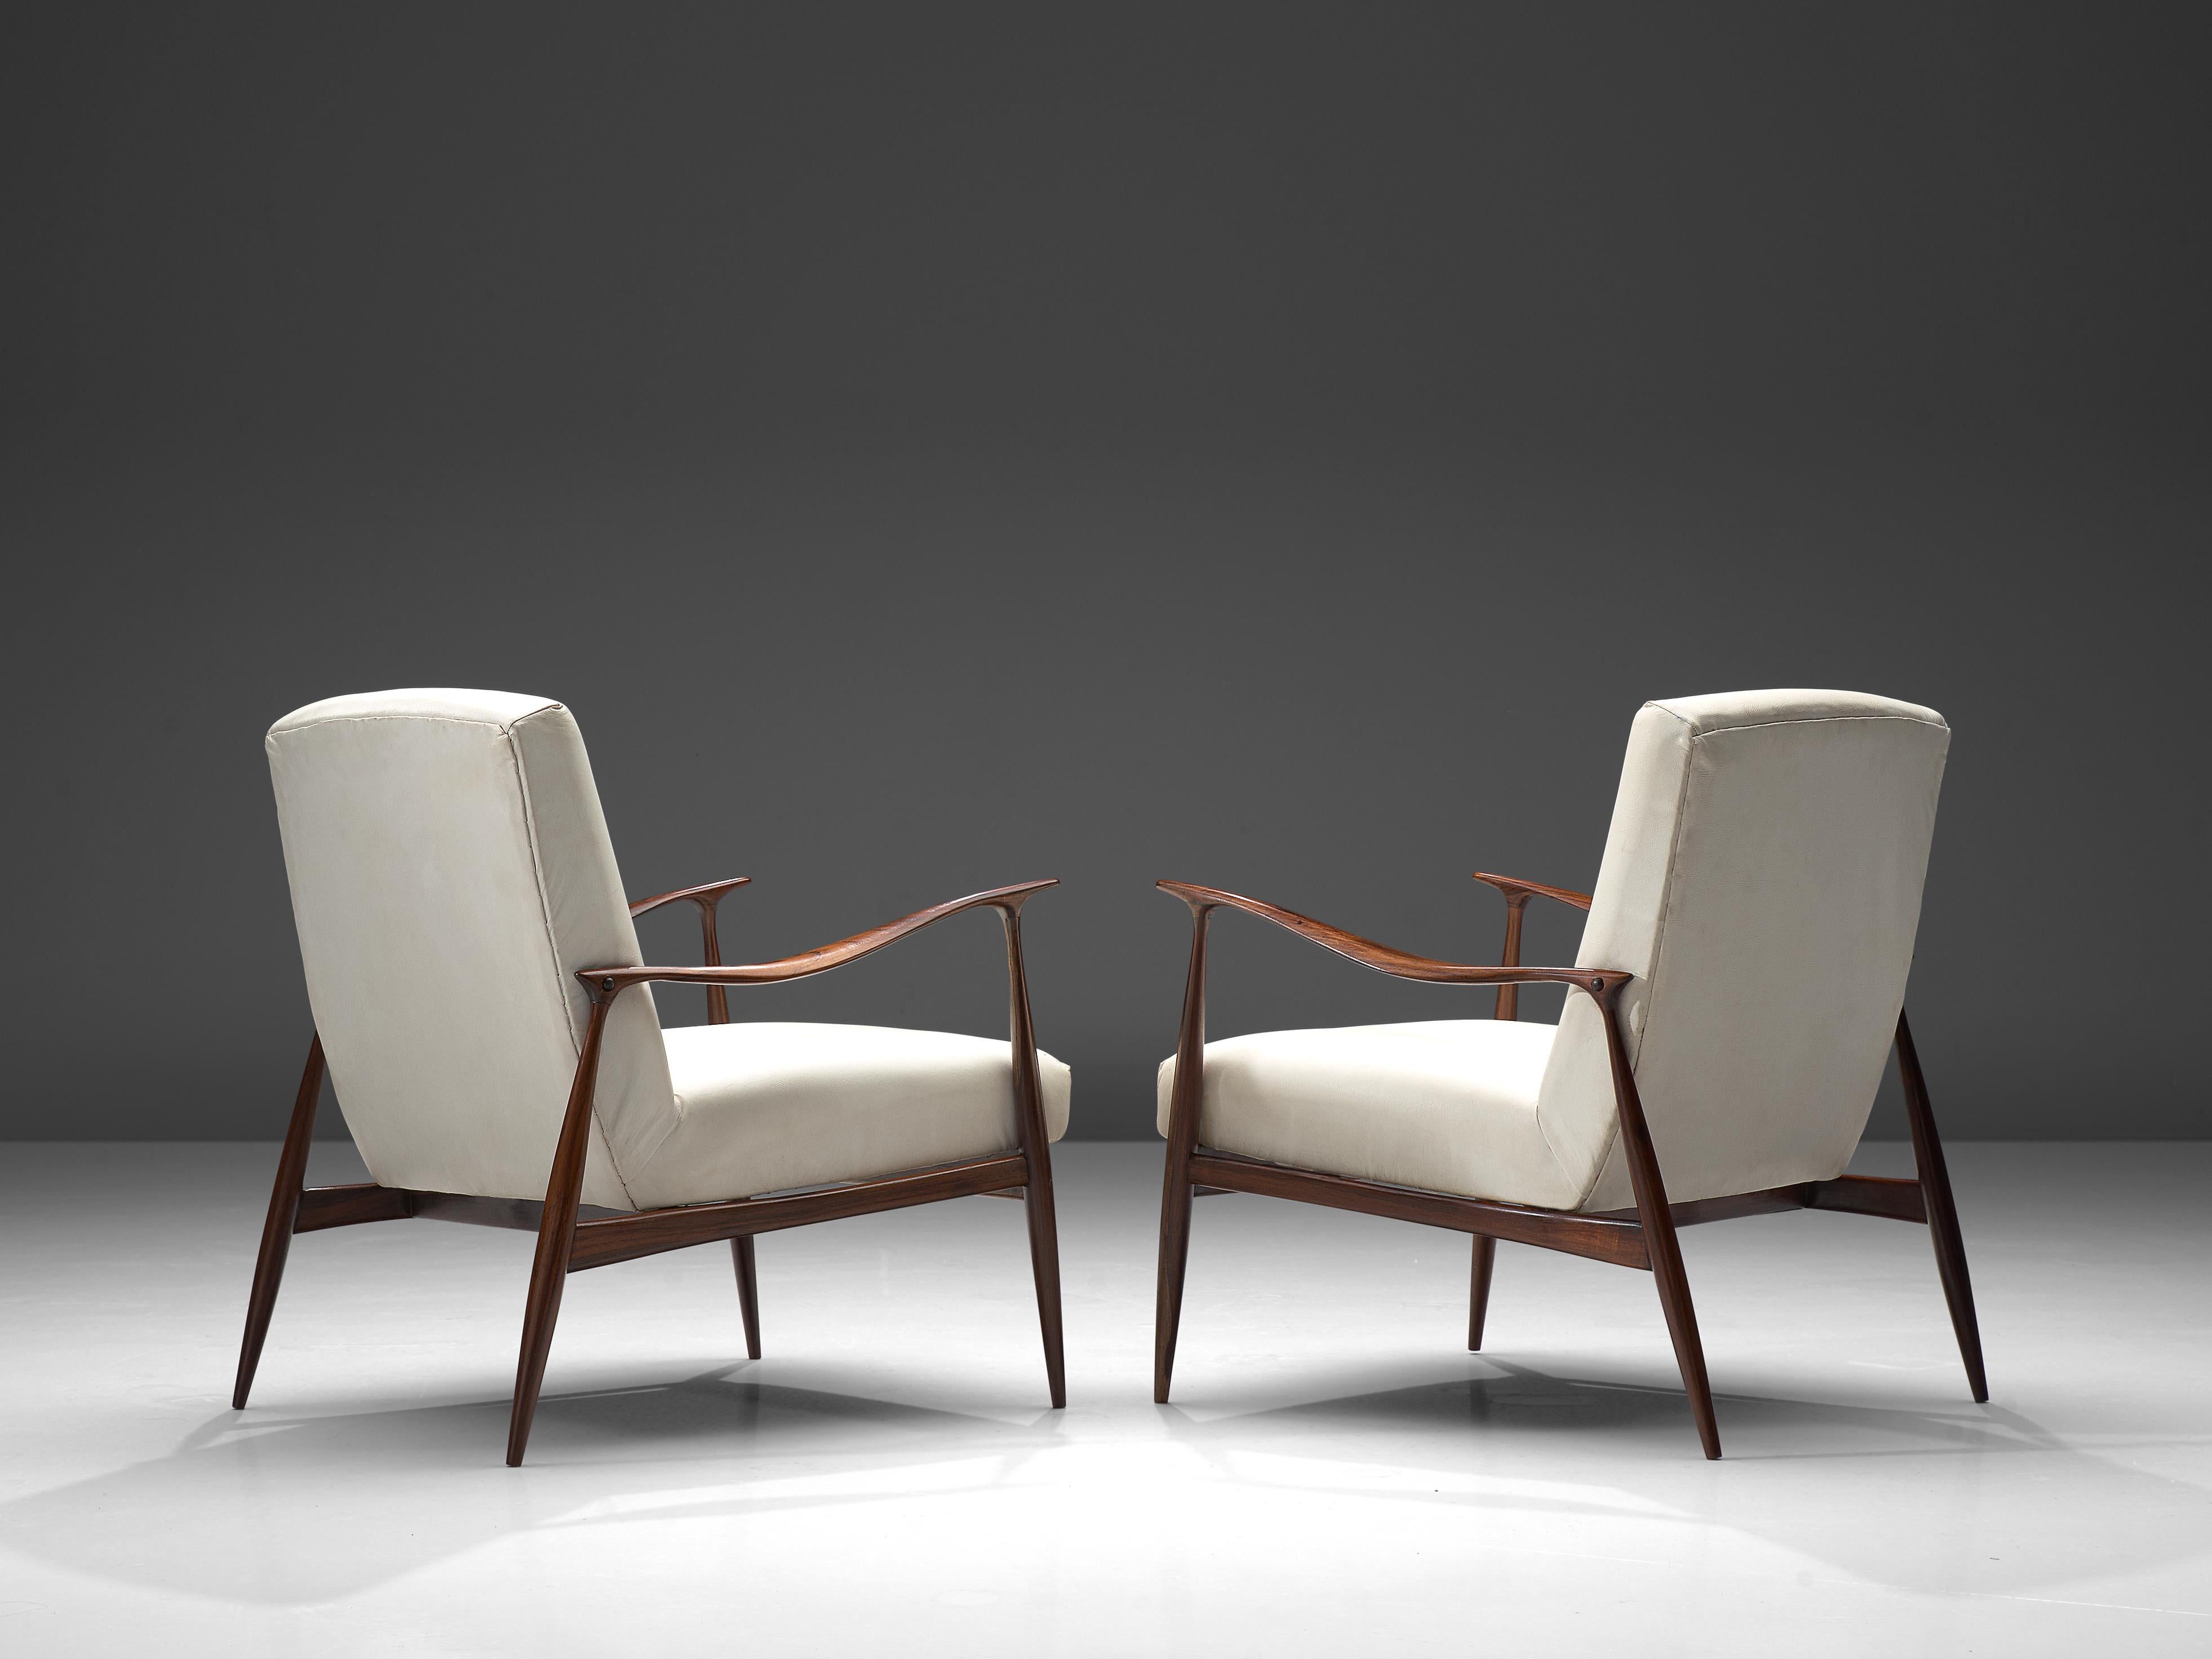 Giuseppe Scapinelli, set of 2 'Paltrona' armchairs, rosewood and leatherette, Brazil, 1950s.

Elegant pair of easy chairs by Brazilian designer Giuseppe Scapinelli. This chair in Caviuna wood exposes the beautiful grain of the wood in an eloquent